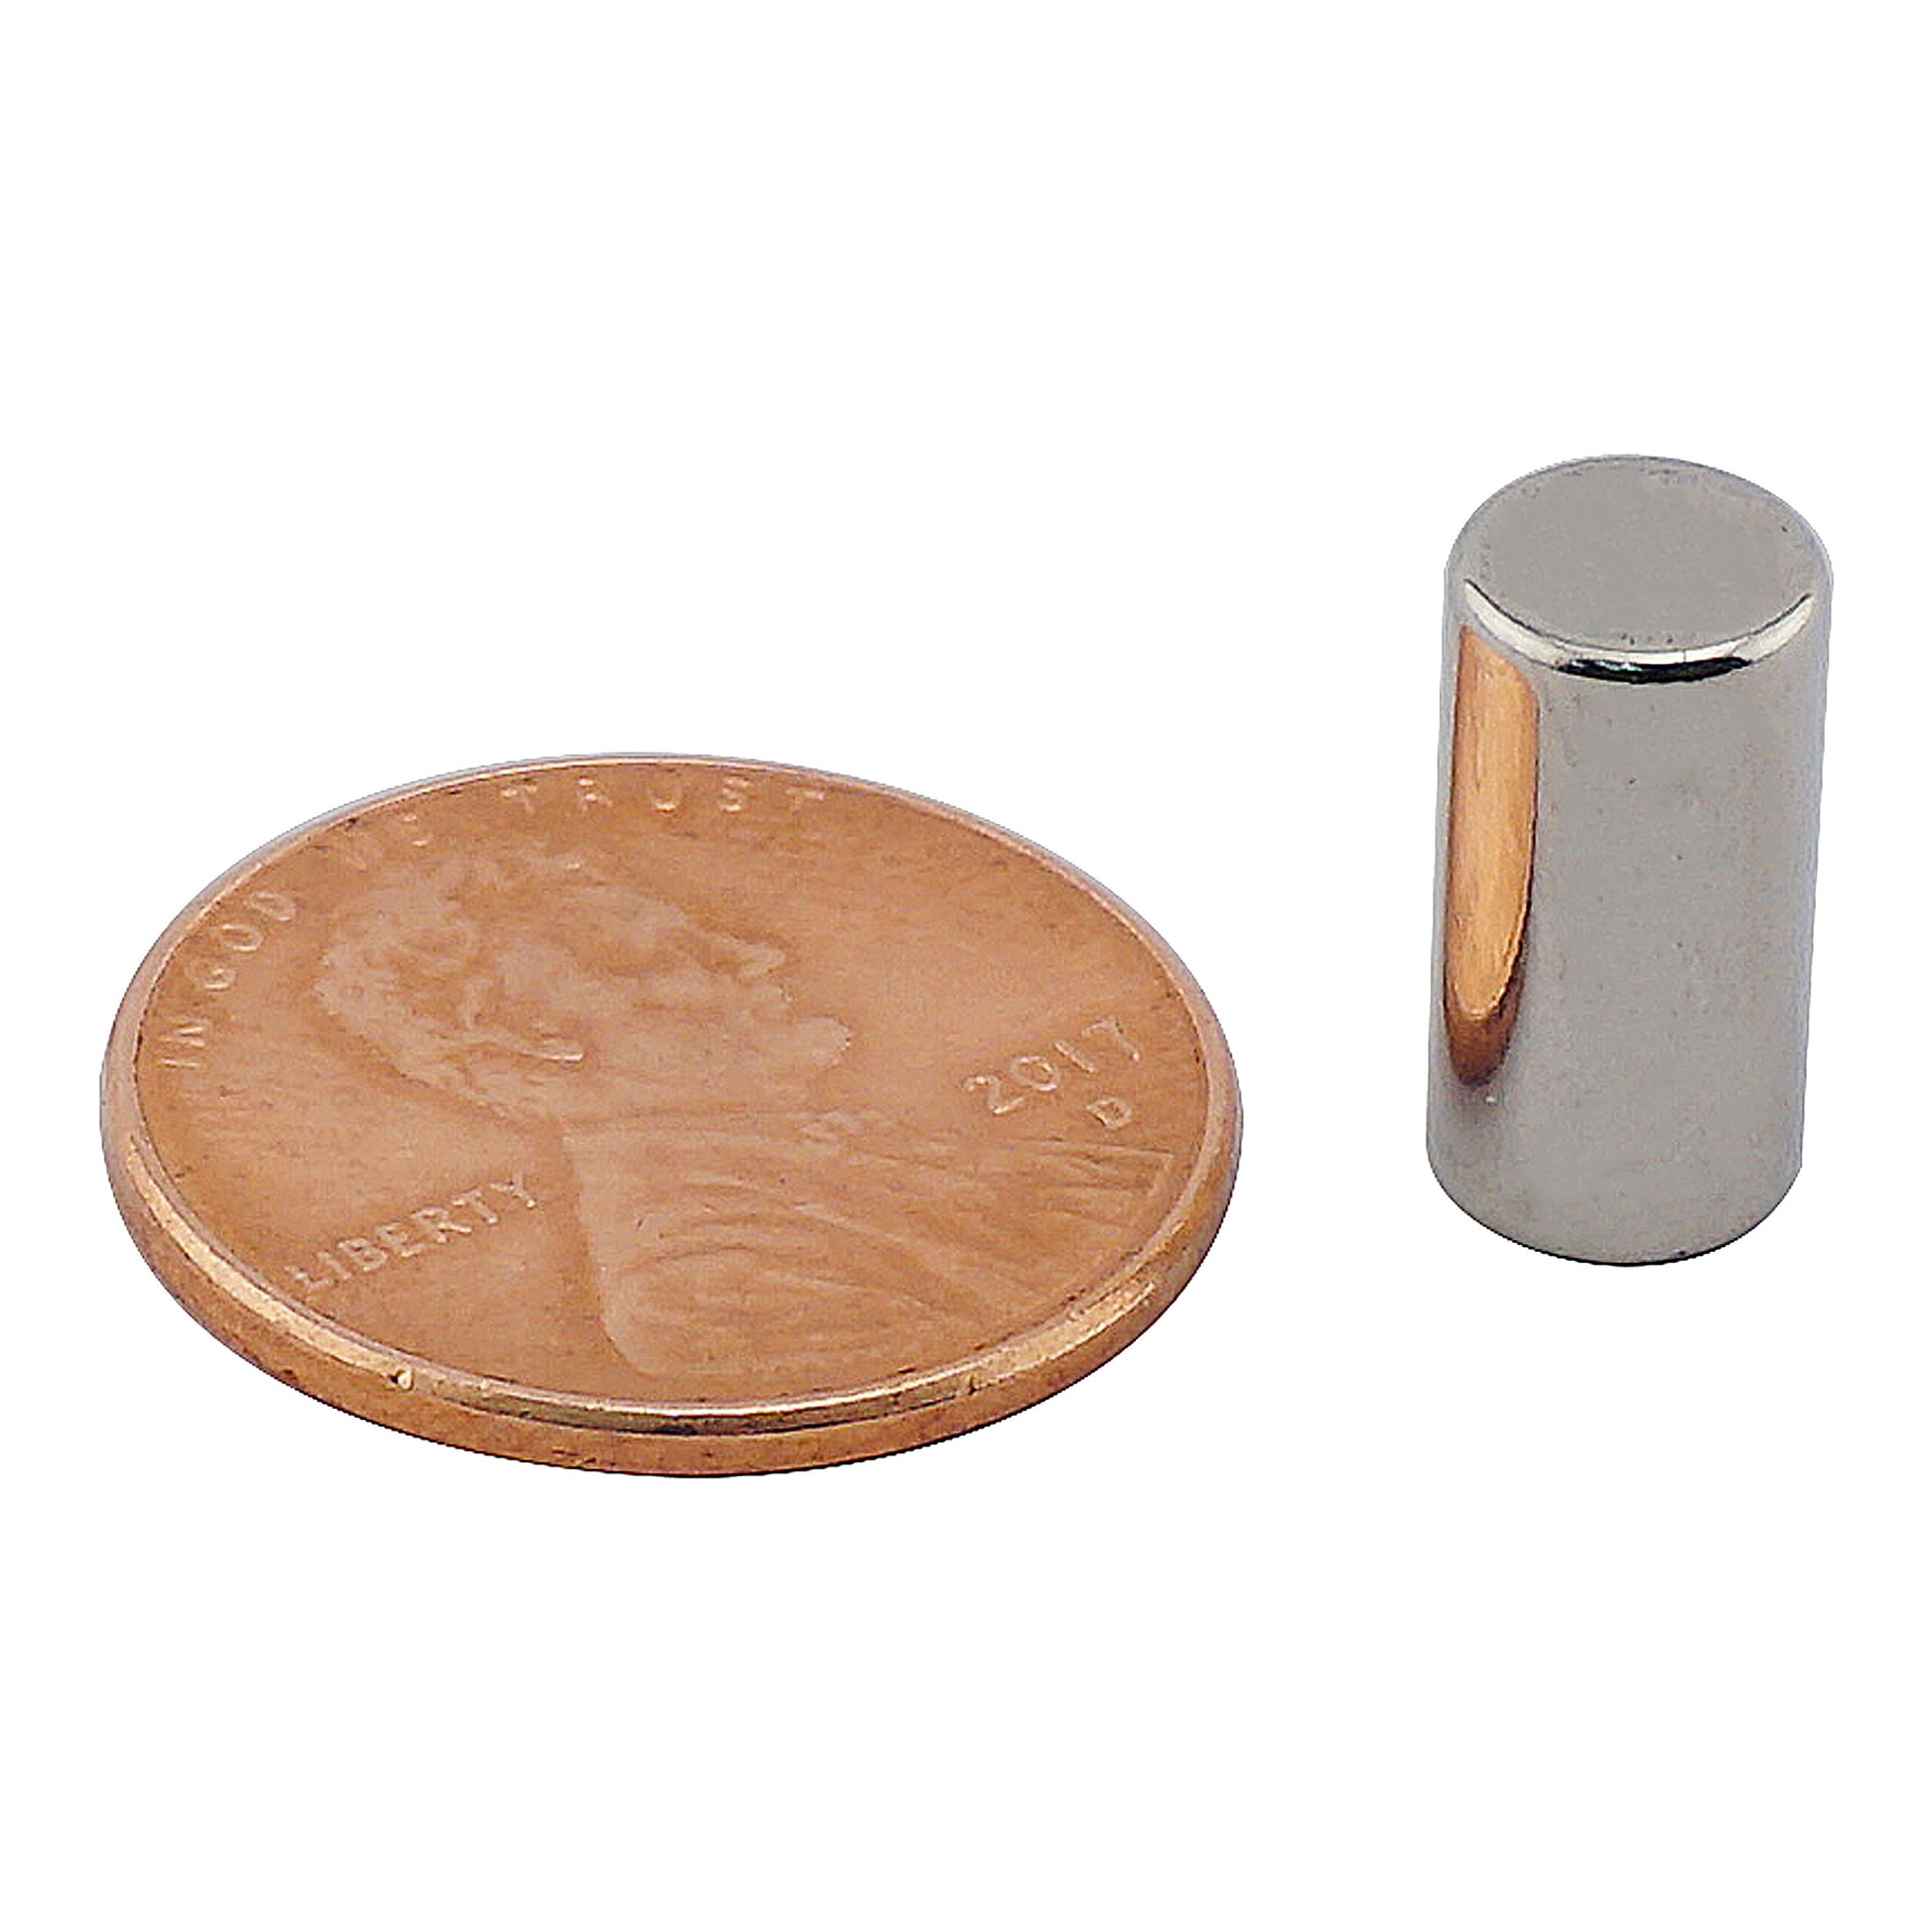 Load image into Gallery viewer, ND45-2550N Neodymium Disc Magnet - Compared to Penny for Size Reference